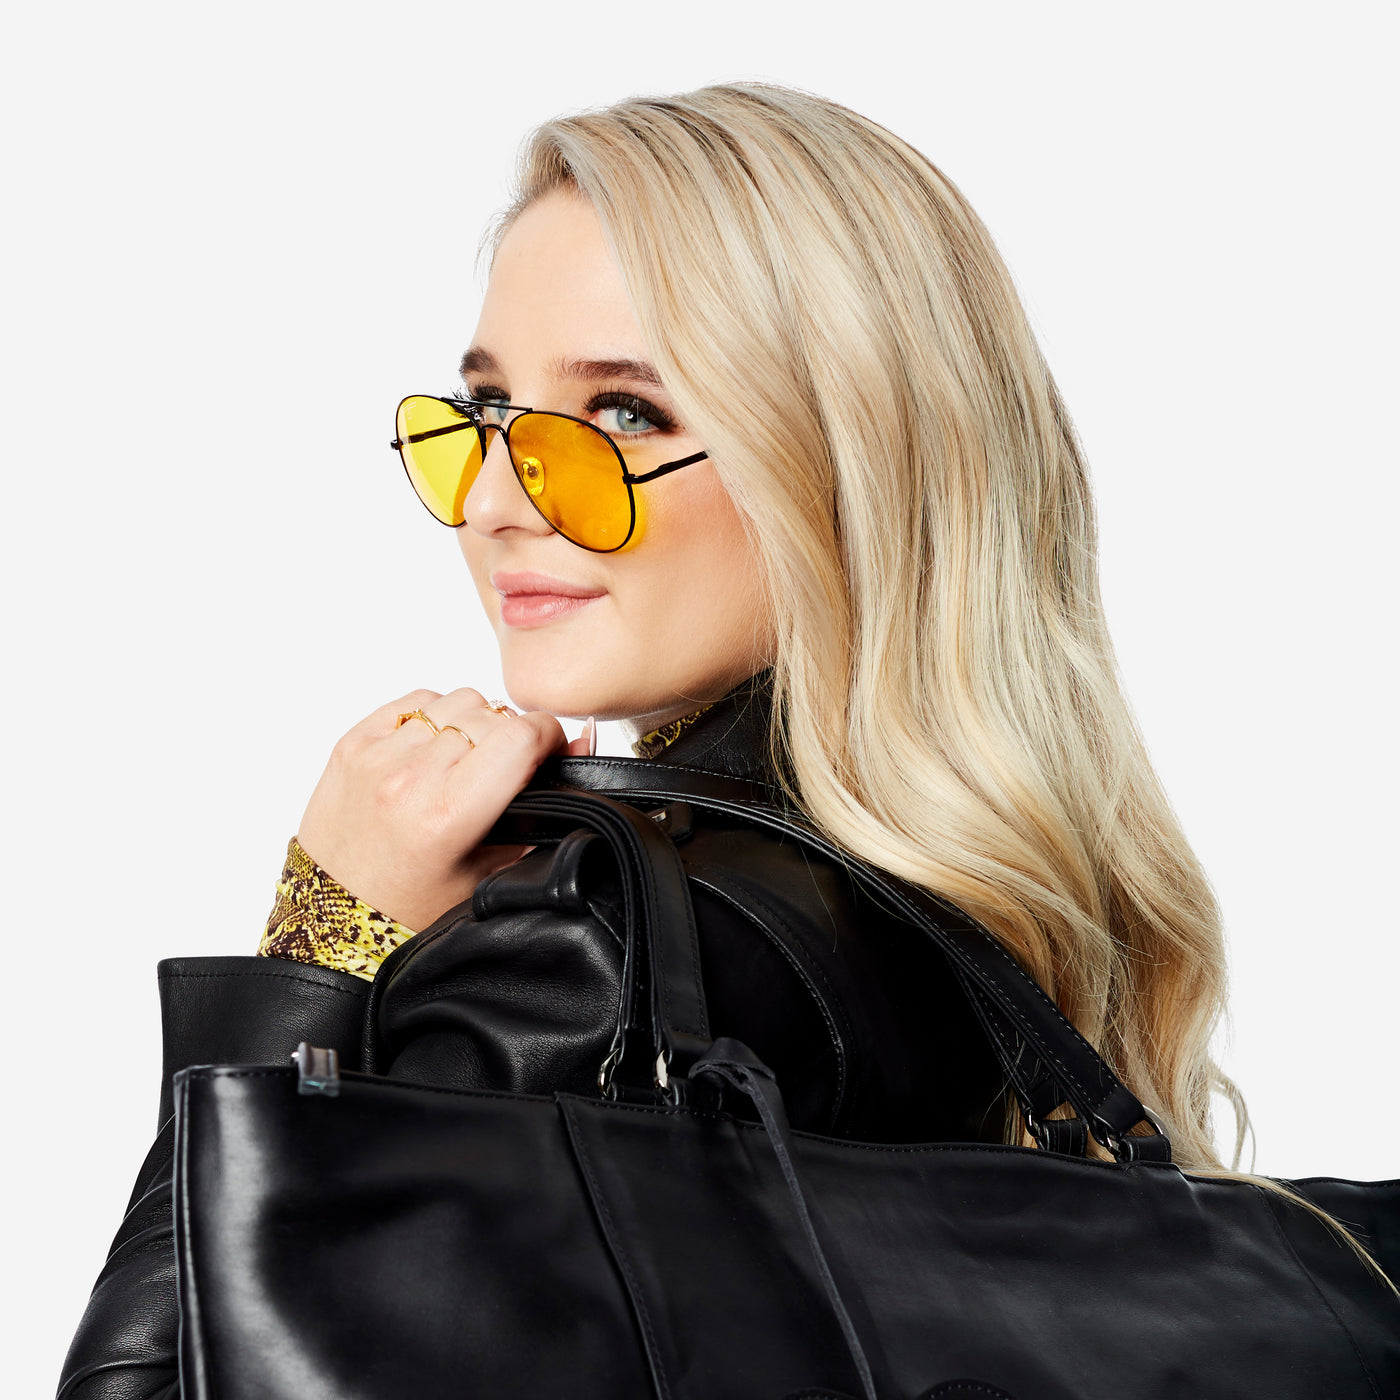 Classic Aviator Sunglasses - Black Metal Frame with Yellow Lens Sunglasses Joey James, The Label   